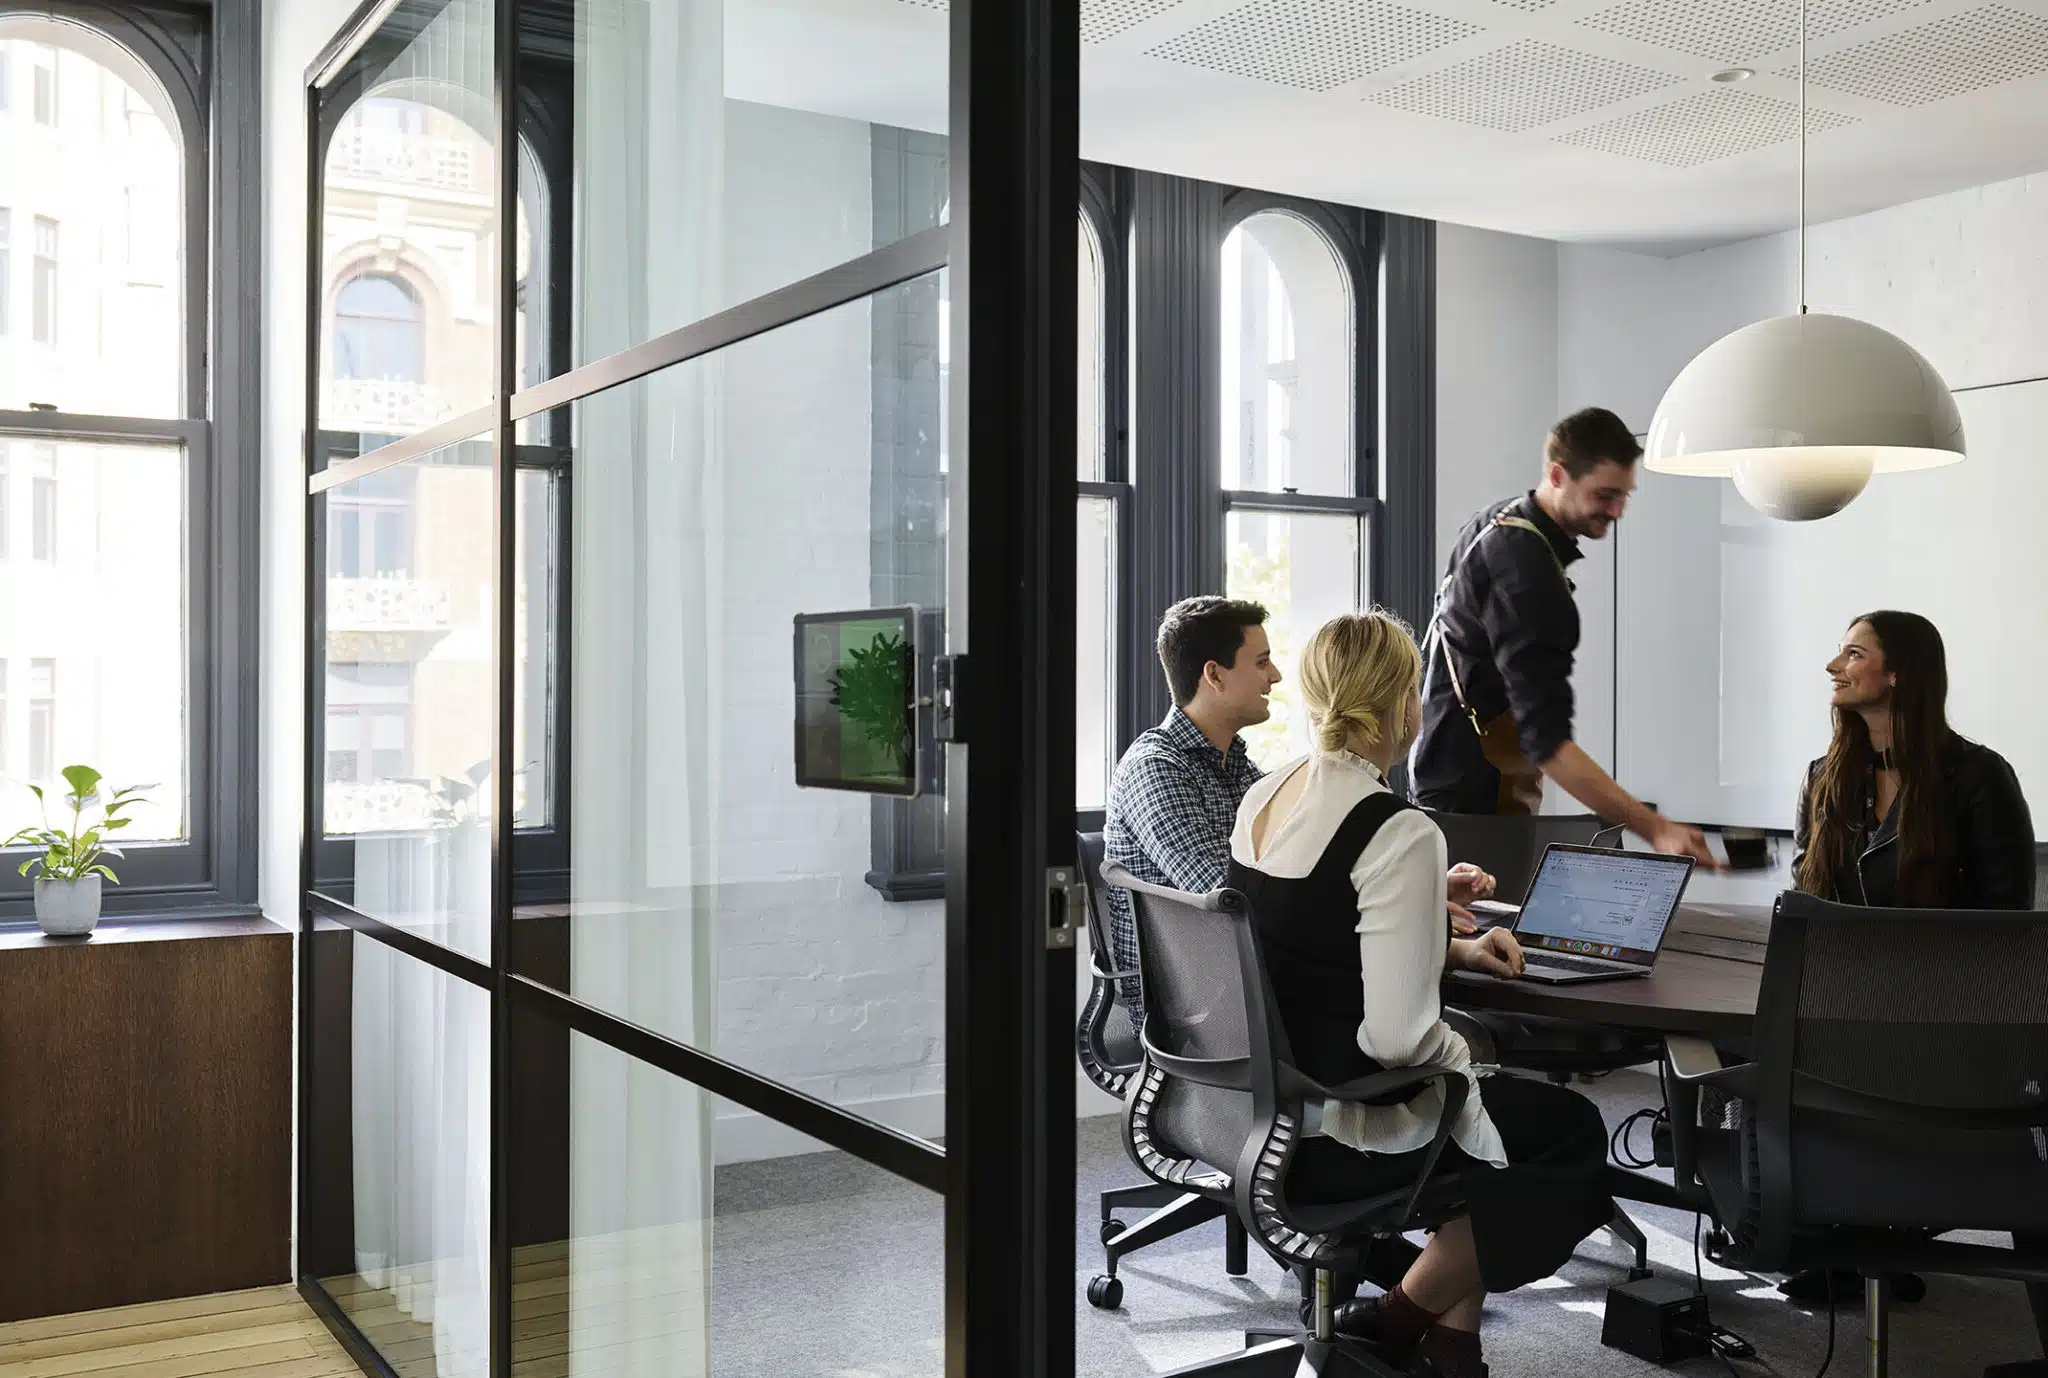  Serviced Offices Hub Australia provides fully-furnished serviced office spaces for teams of 1 to 100, ready for your team to move in. Discover our premium serviced office spaces with flexible monthly terms in Sydney, Melbourne, Brisbane, Canberra, and Adelaide.